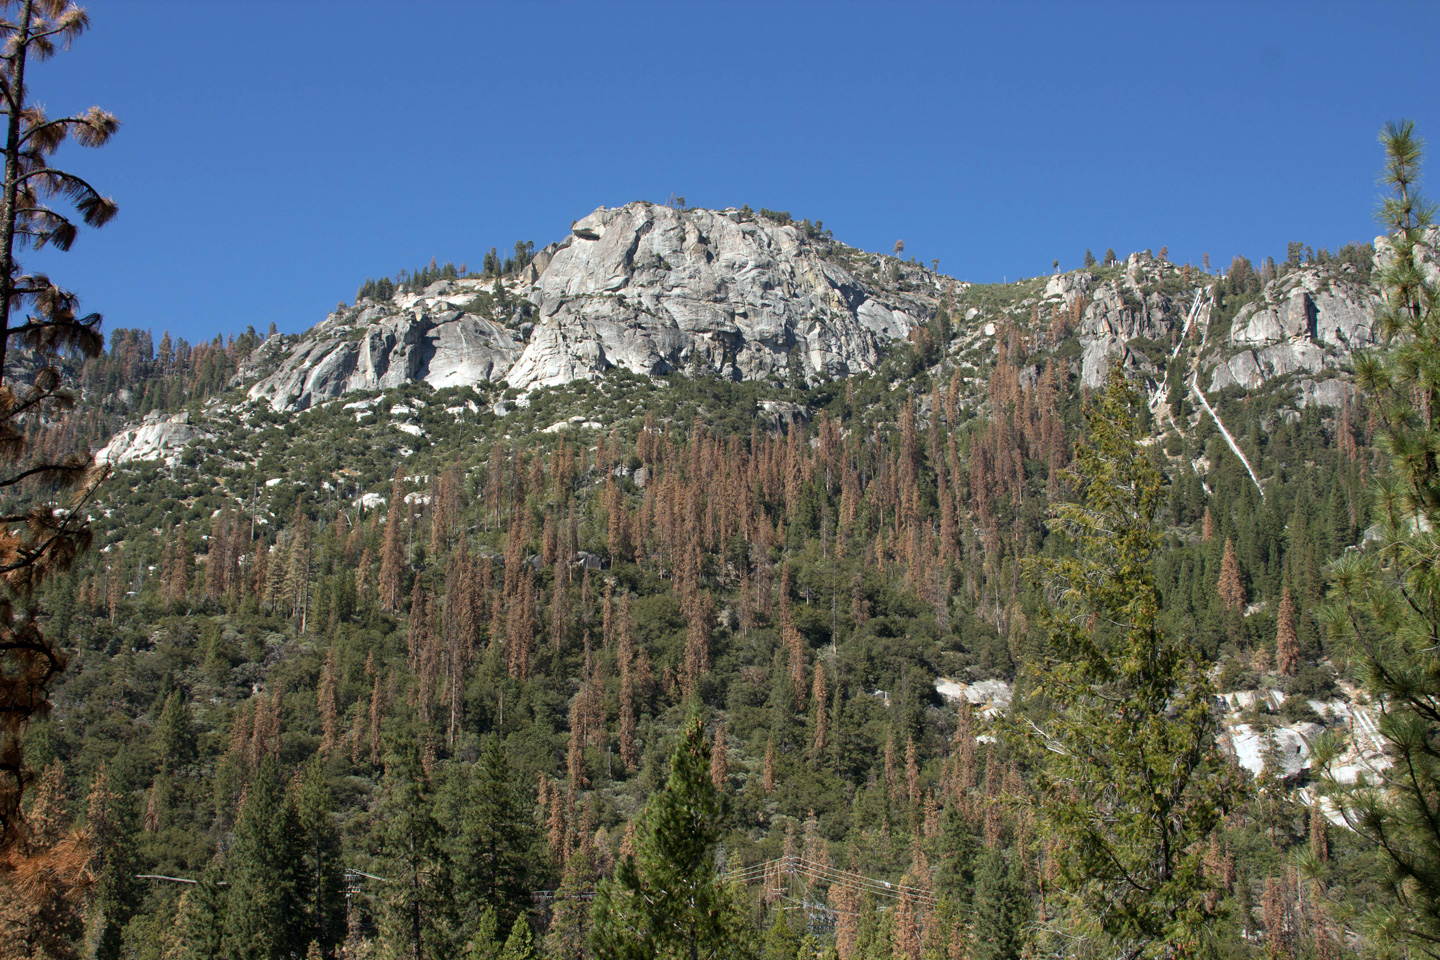 A photo of a forest with green and dead trees, killed by a beetle infestation in the southern Sierra.